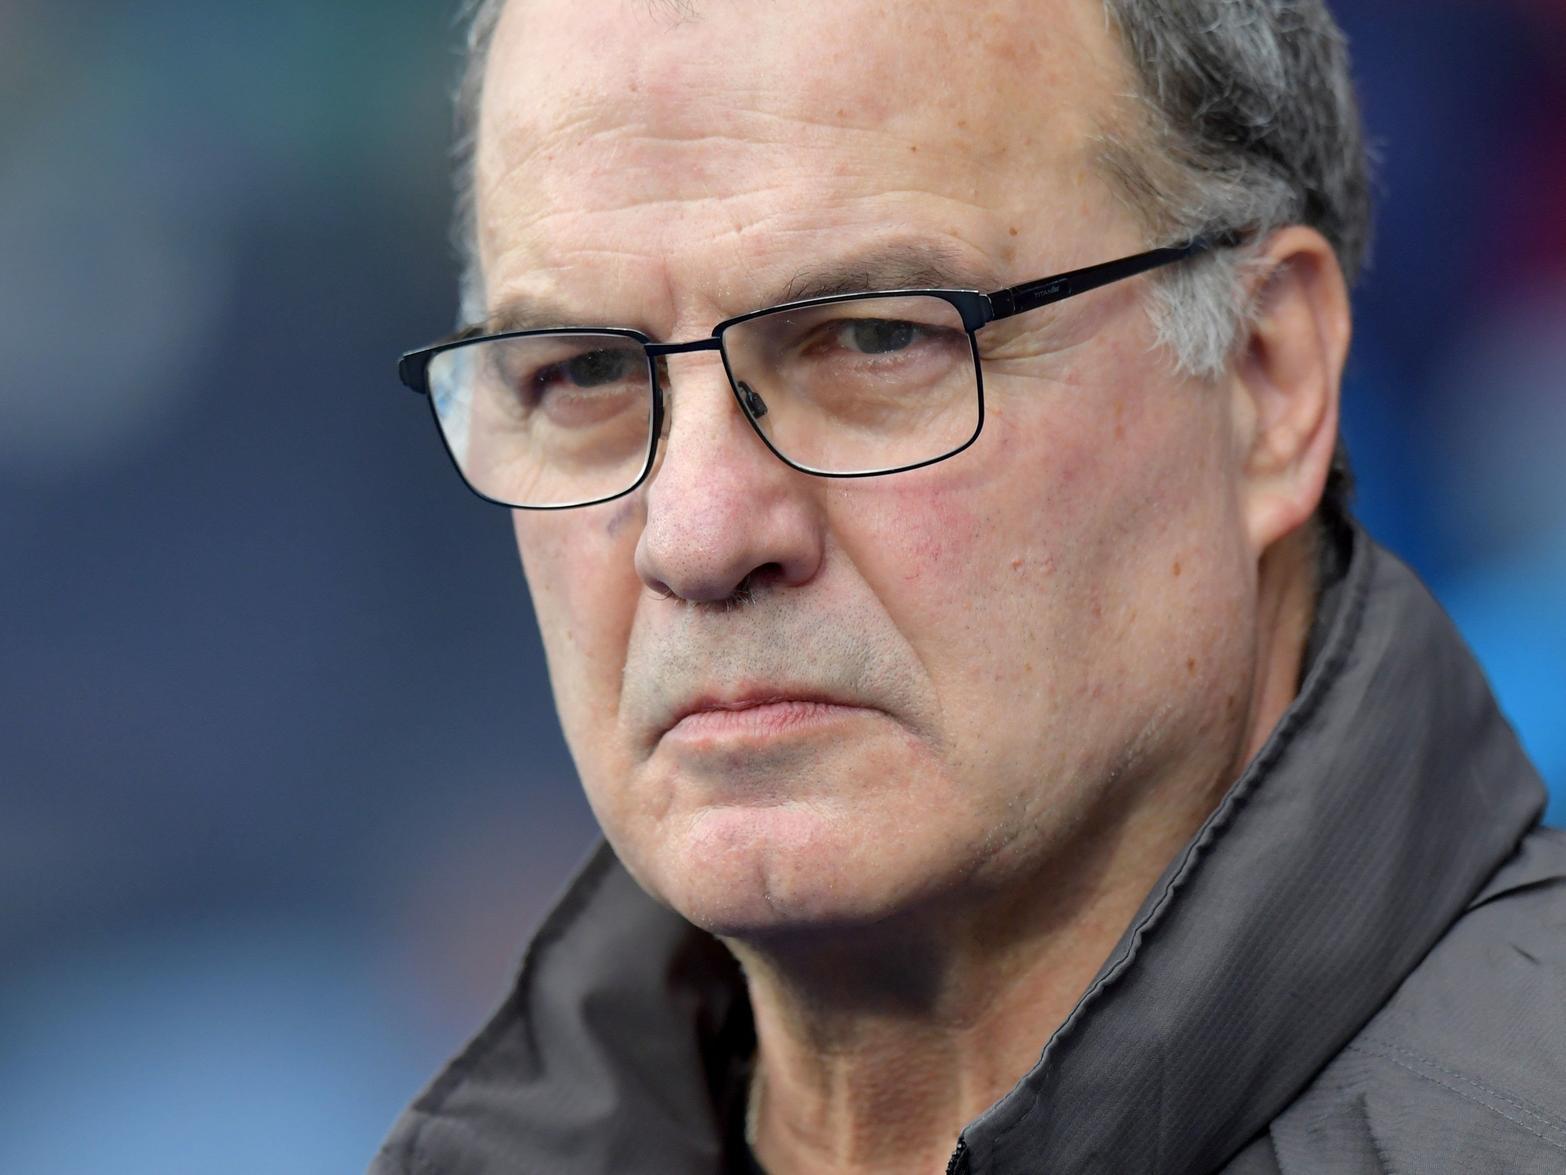 Leeds United head coach Marcelo Bielsa has a big call to make this evening - and it is one he is not finding easy. (Pic: PA)